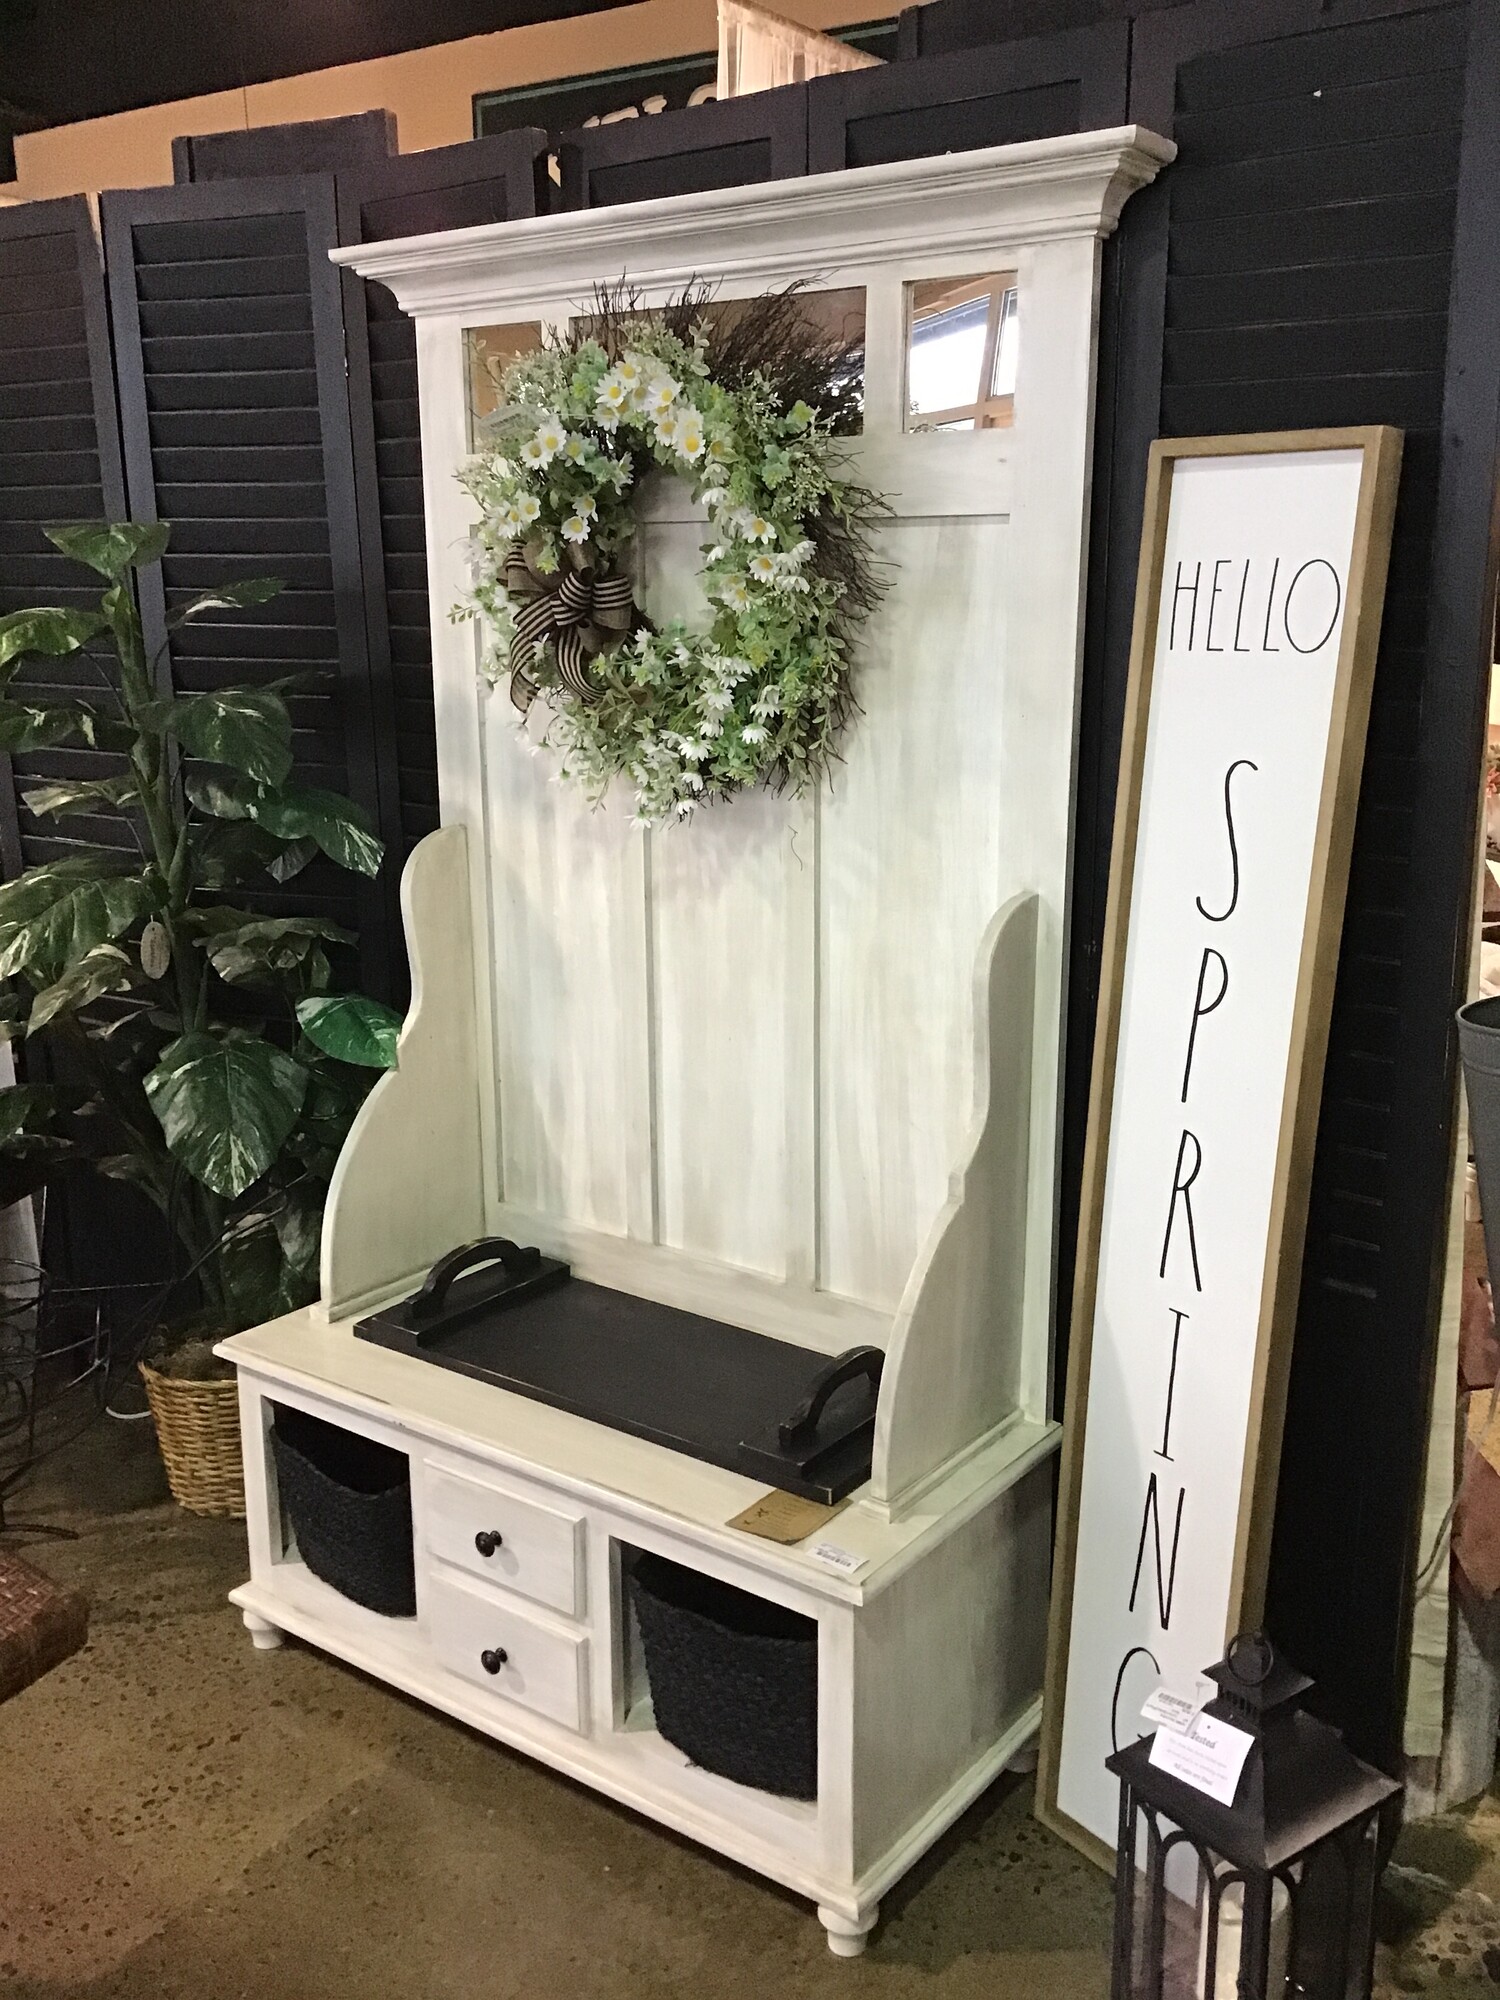 Handmade by Local Artist
Wooden Hall Tree
Driftwood style paint
Two double hooks for coats
Two drawers
Includes two black baskets

Dimensions: 40x17x71